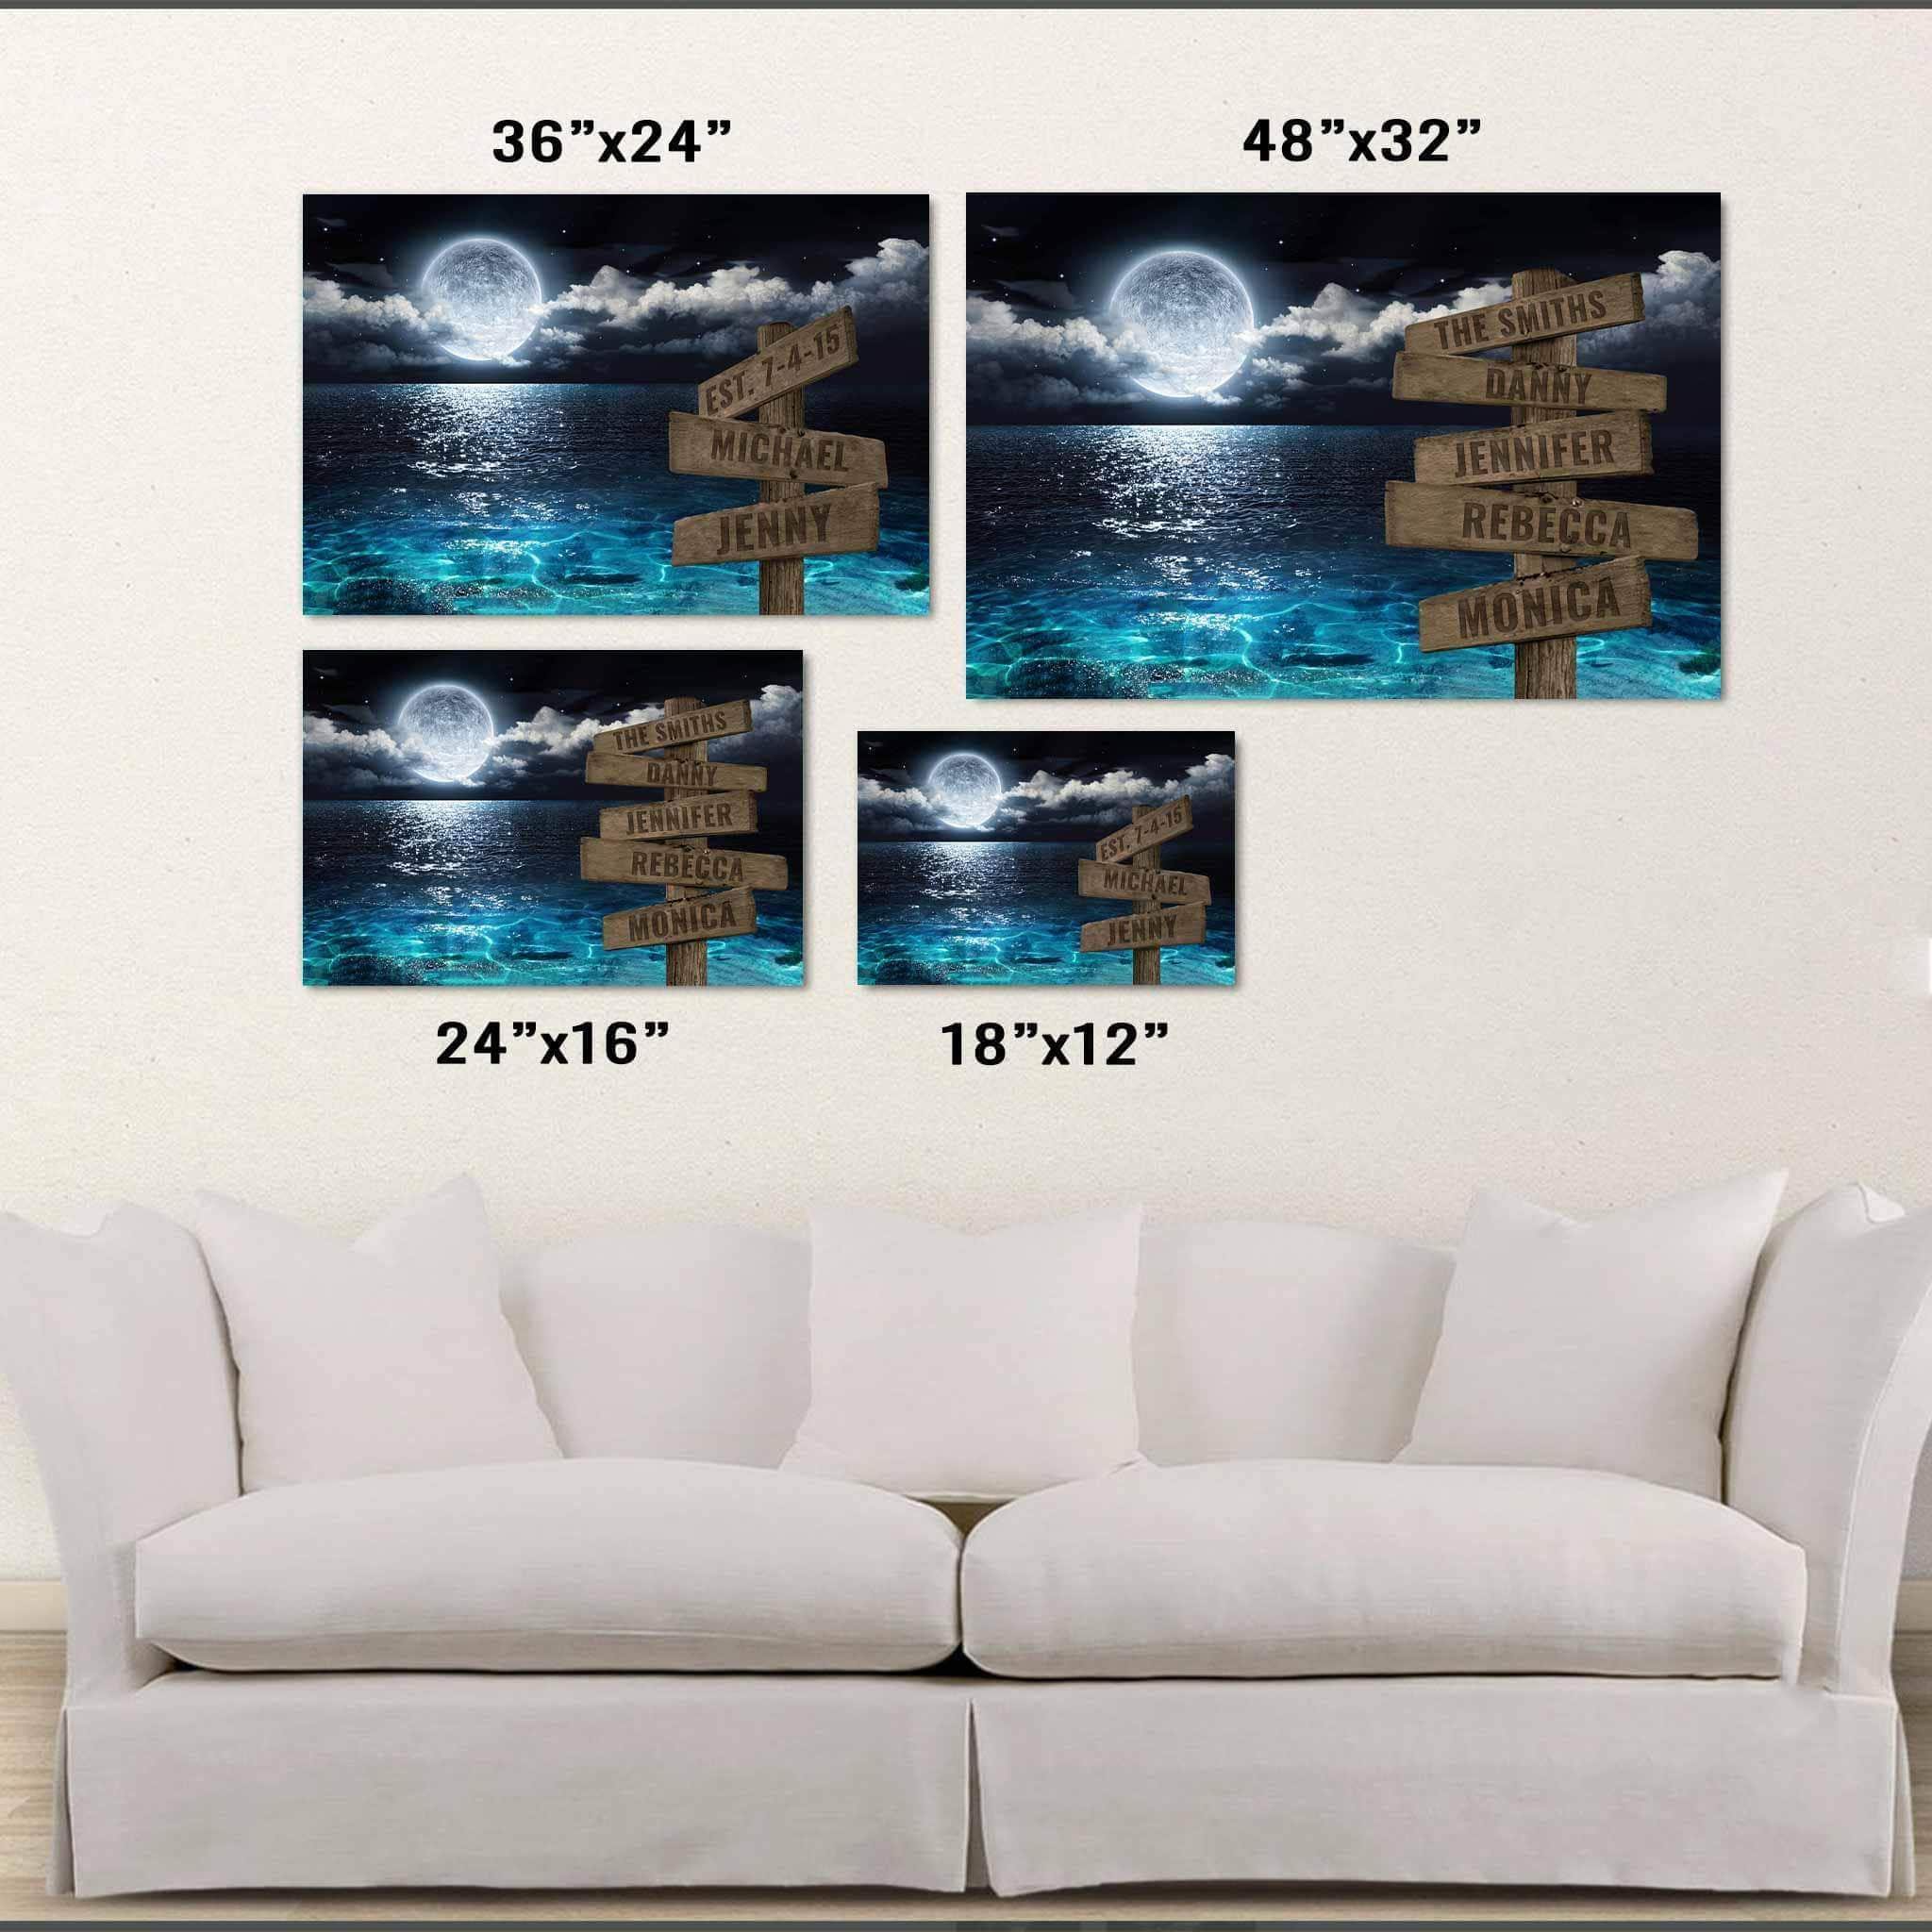 Full Moon Ocean Nightscape v1 Multiple Names Personalized Directional Sign CanvasCustomly Gifts